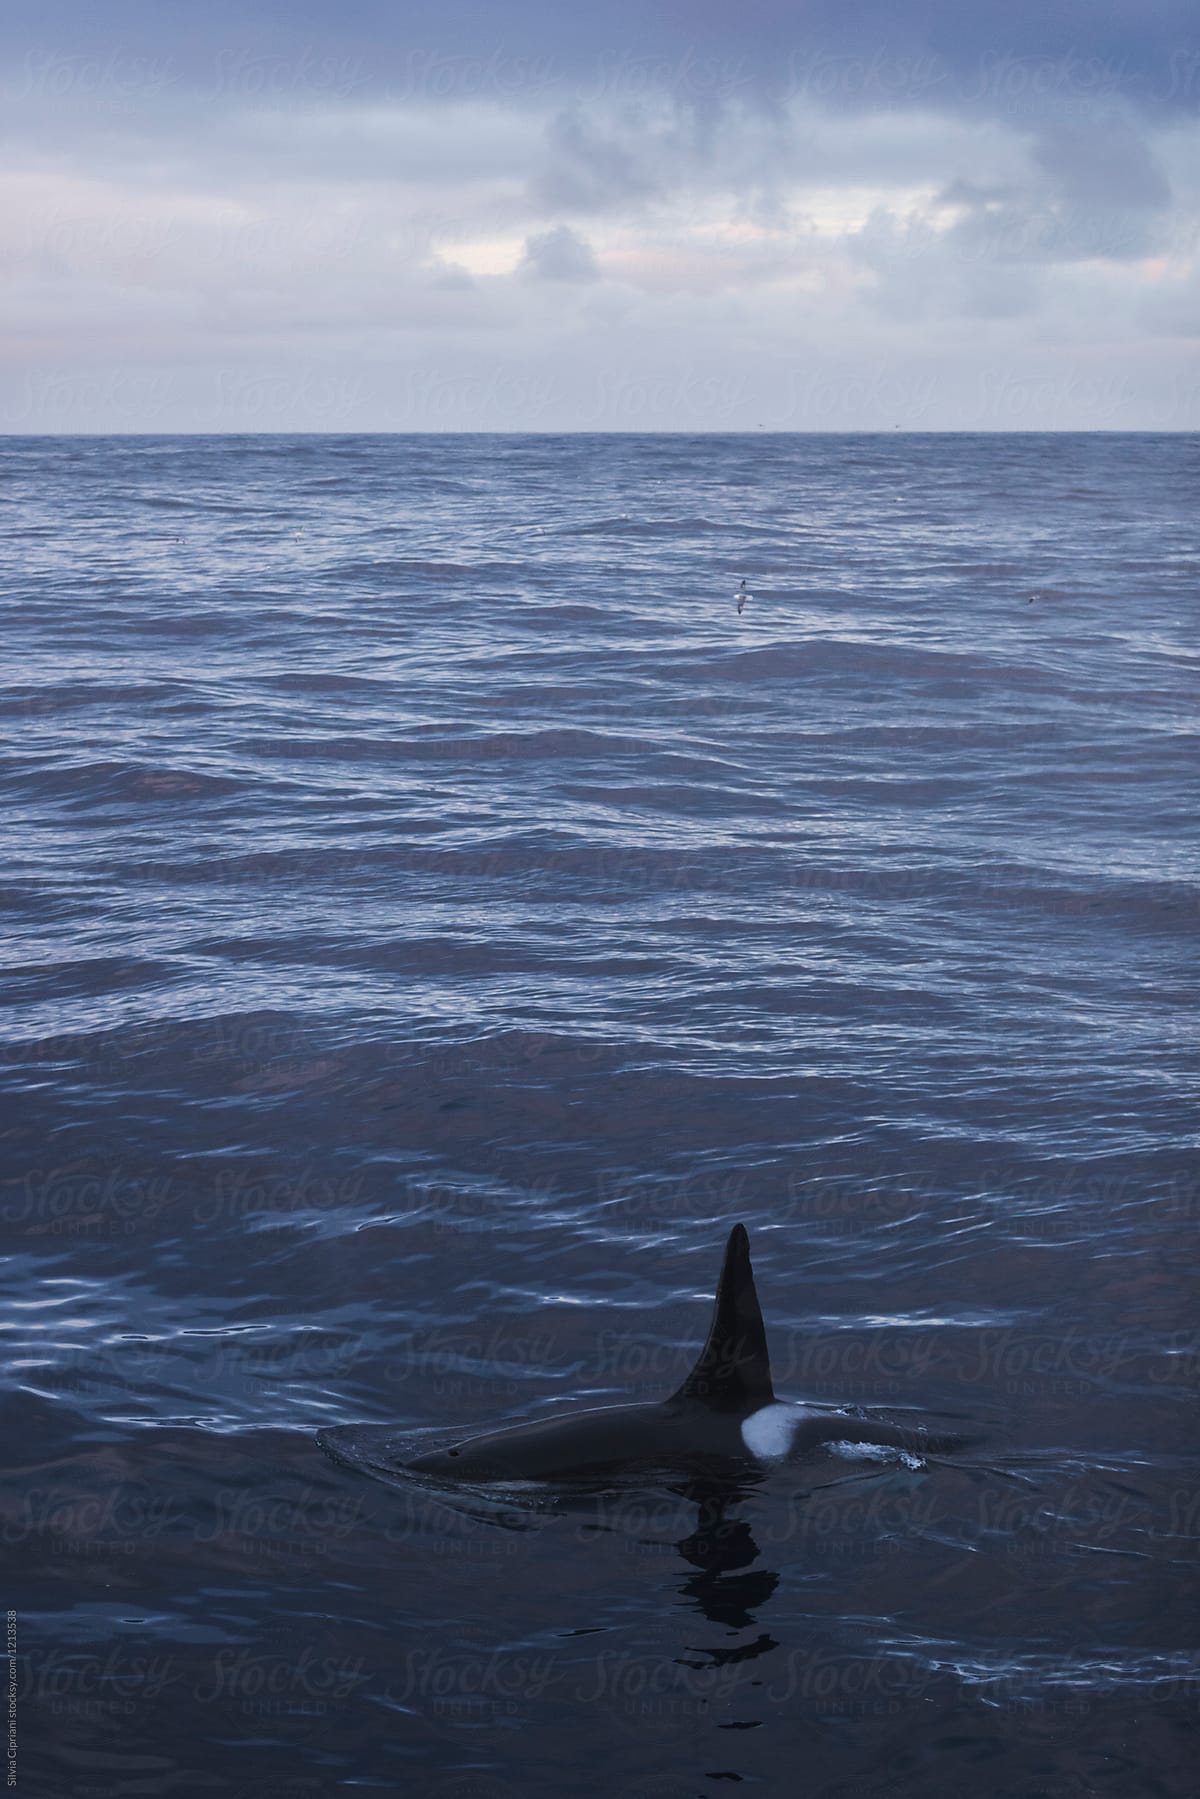 Wild killer whale out at sea